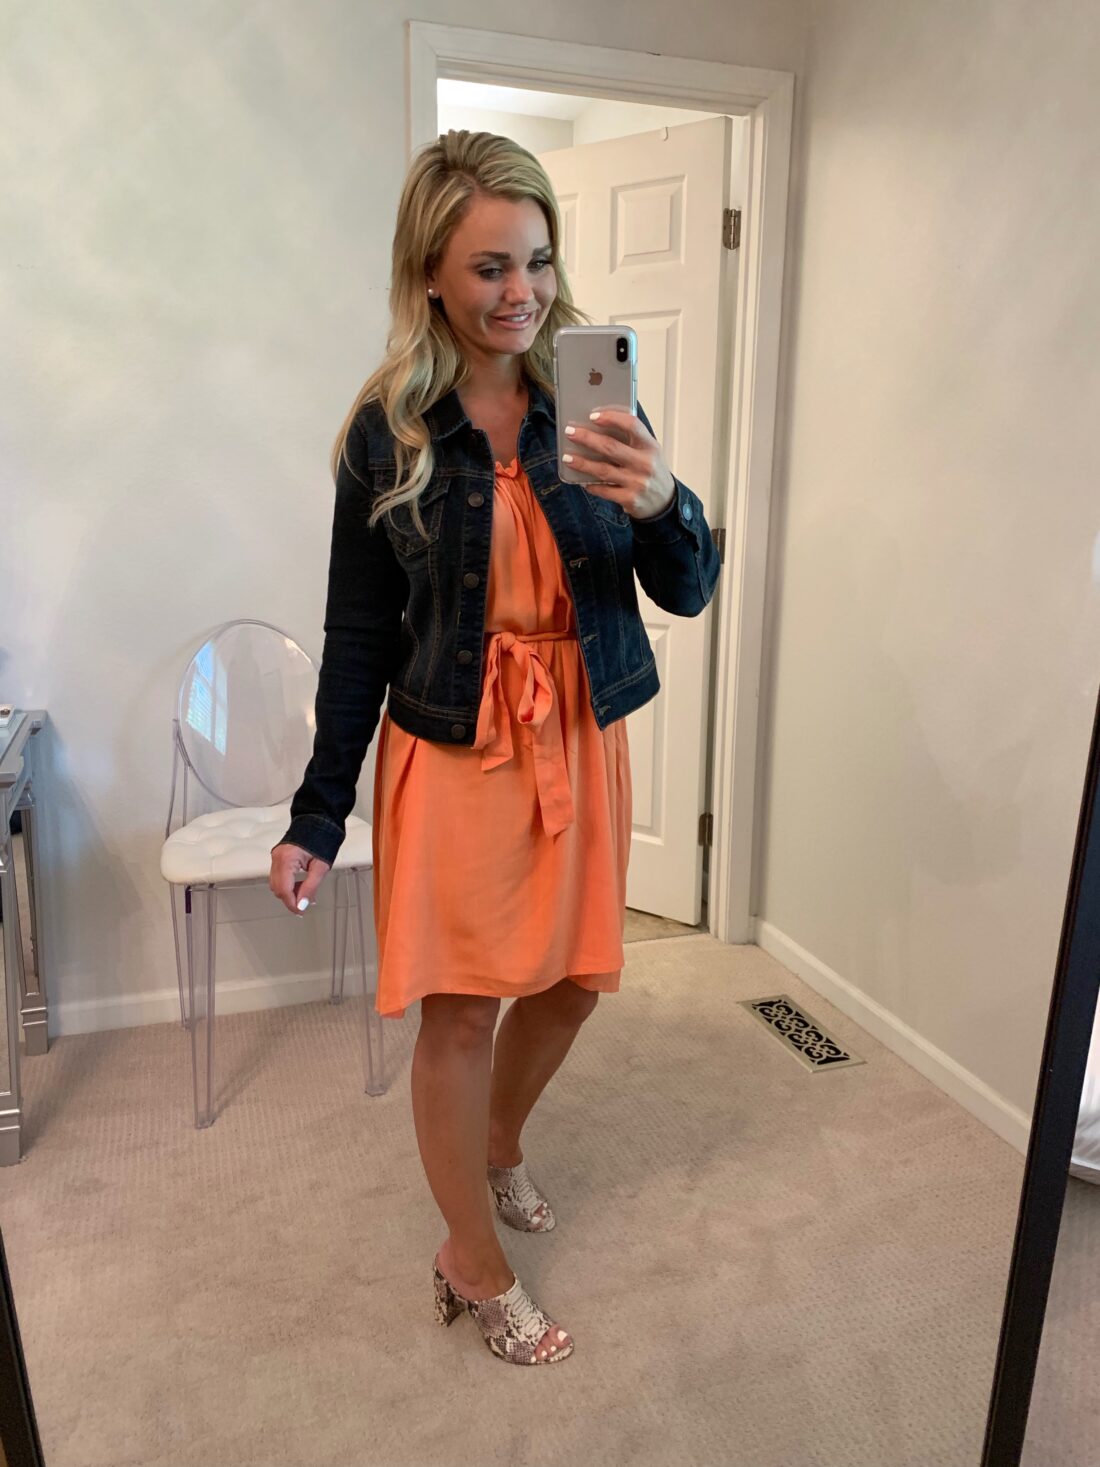 Amazon Fashion Finds for Fall. Orange Dress with a denim jacket and snakeskin shoes.